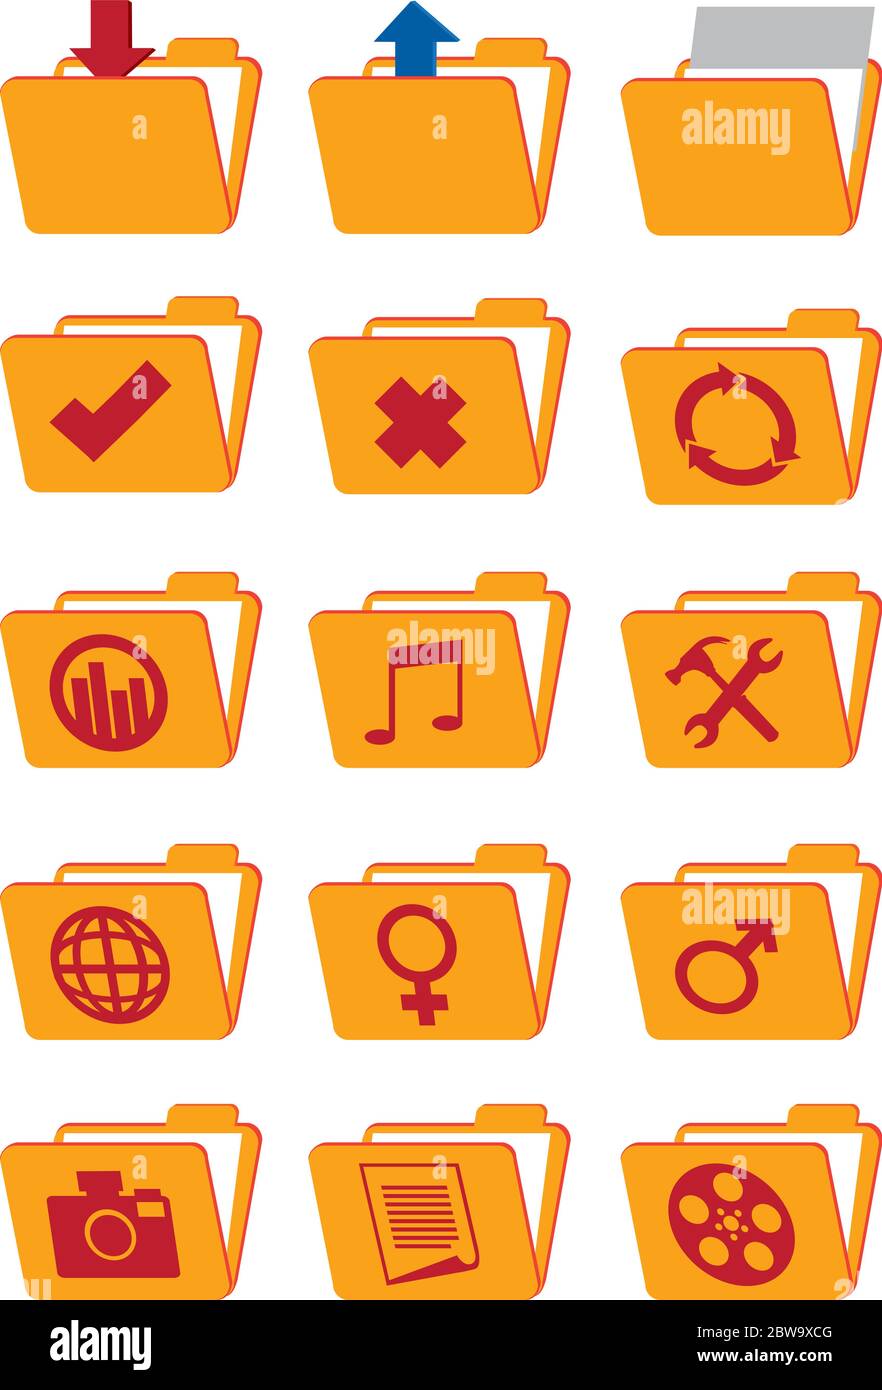 Computer folder icons in orange color with various conceptual symbols. Vector icon set isolated on white background. Stock Vector